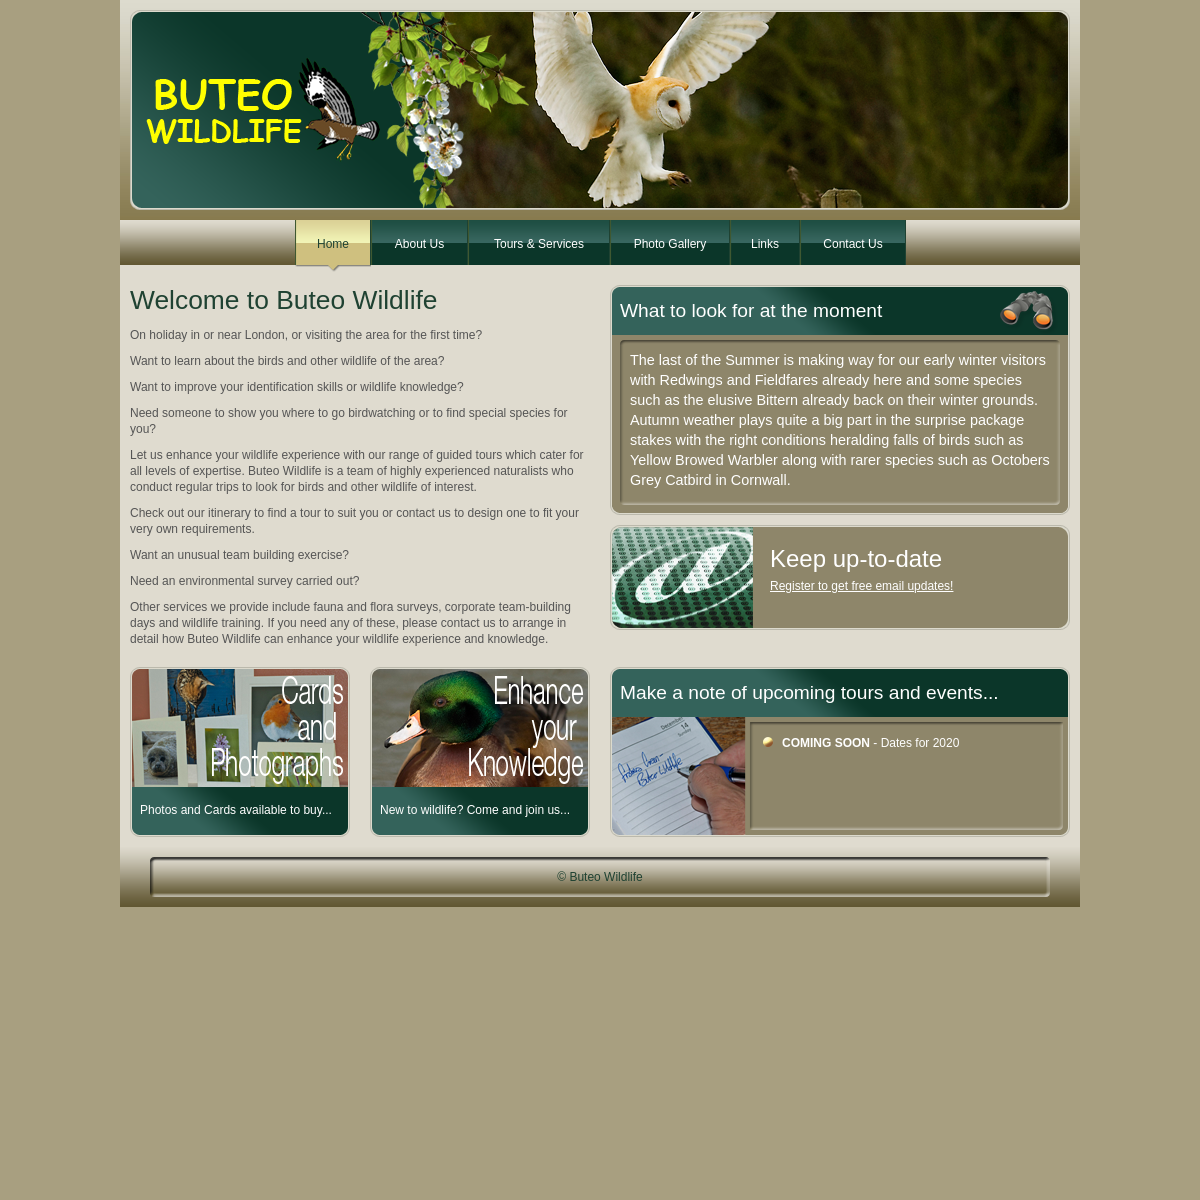 A complete backup of buteowildlife.co.uk